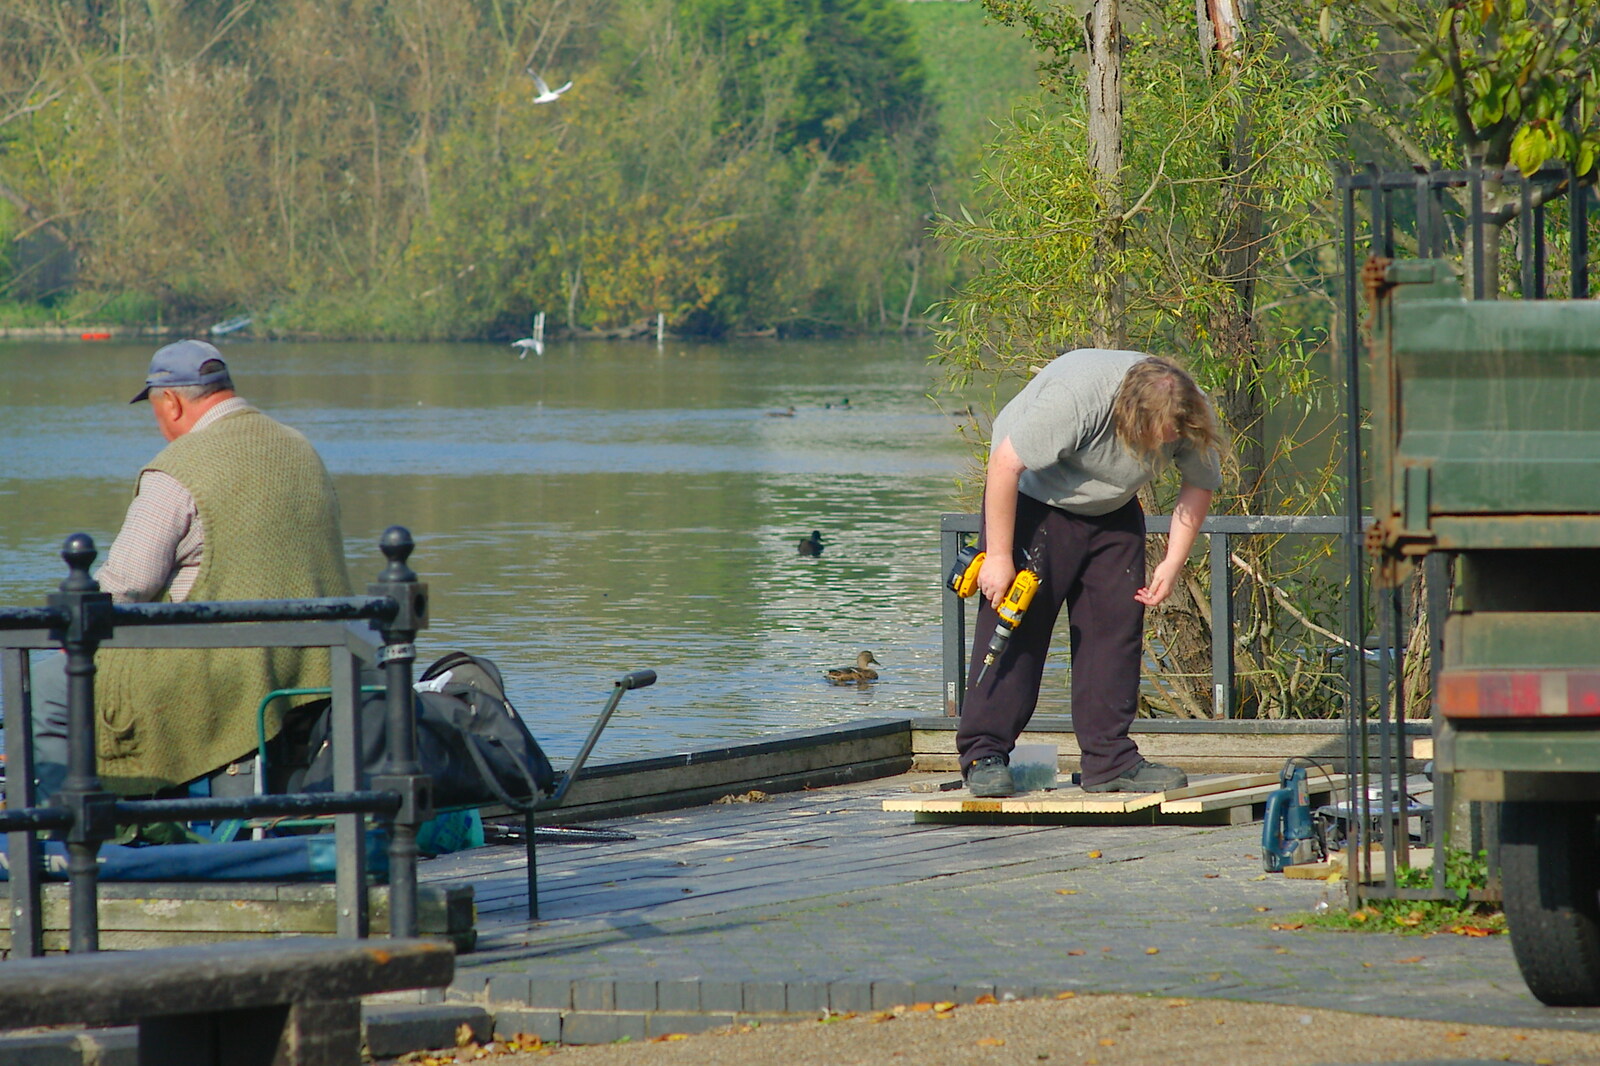 The Magic Numbers and Scenes of Diss, Norfolk - 15th October 2005: Down in Diss, the fishing pontoon is repaired